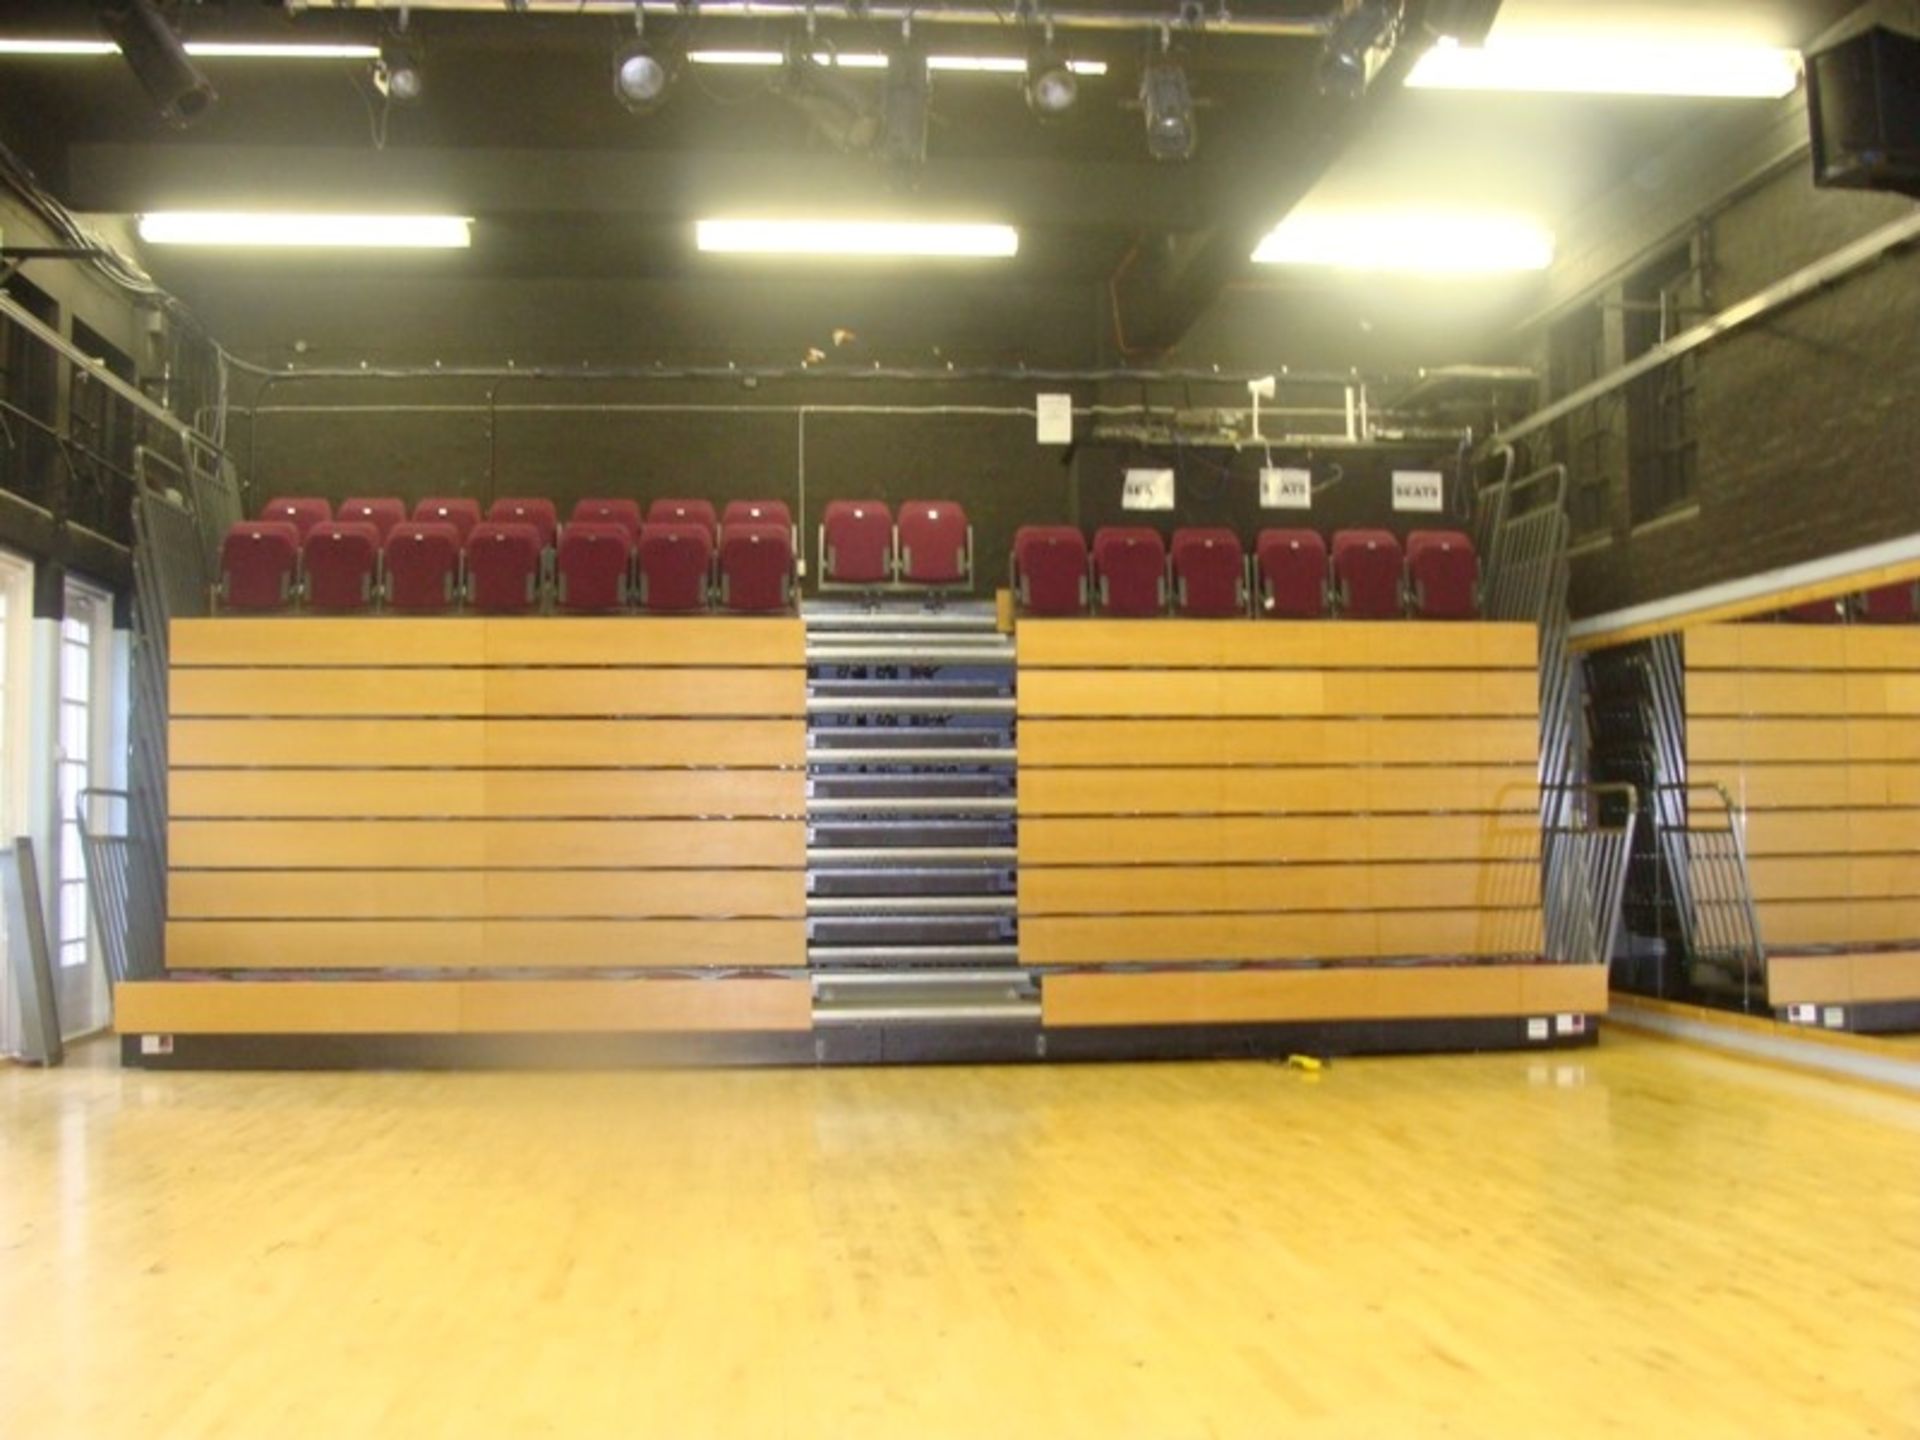 1 x Motorised Retractable Seating Unit By Audience Systems UK - Ref: 43 - CL581 - Location: - Image 2 of 2